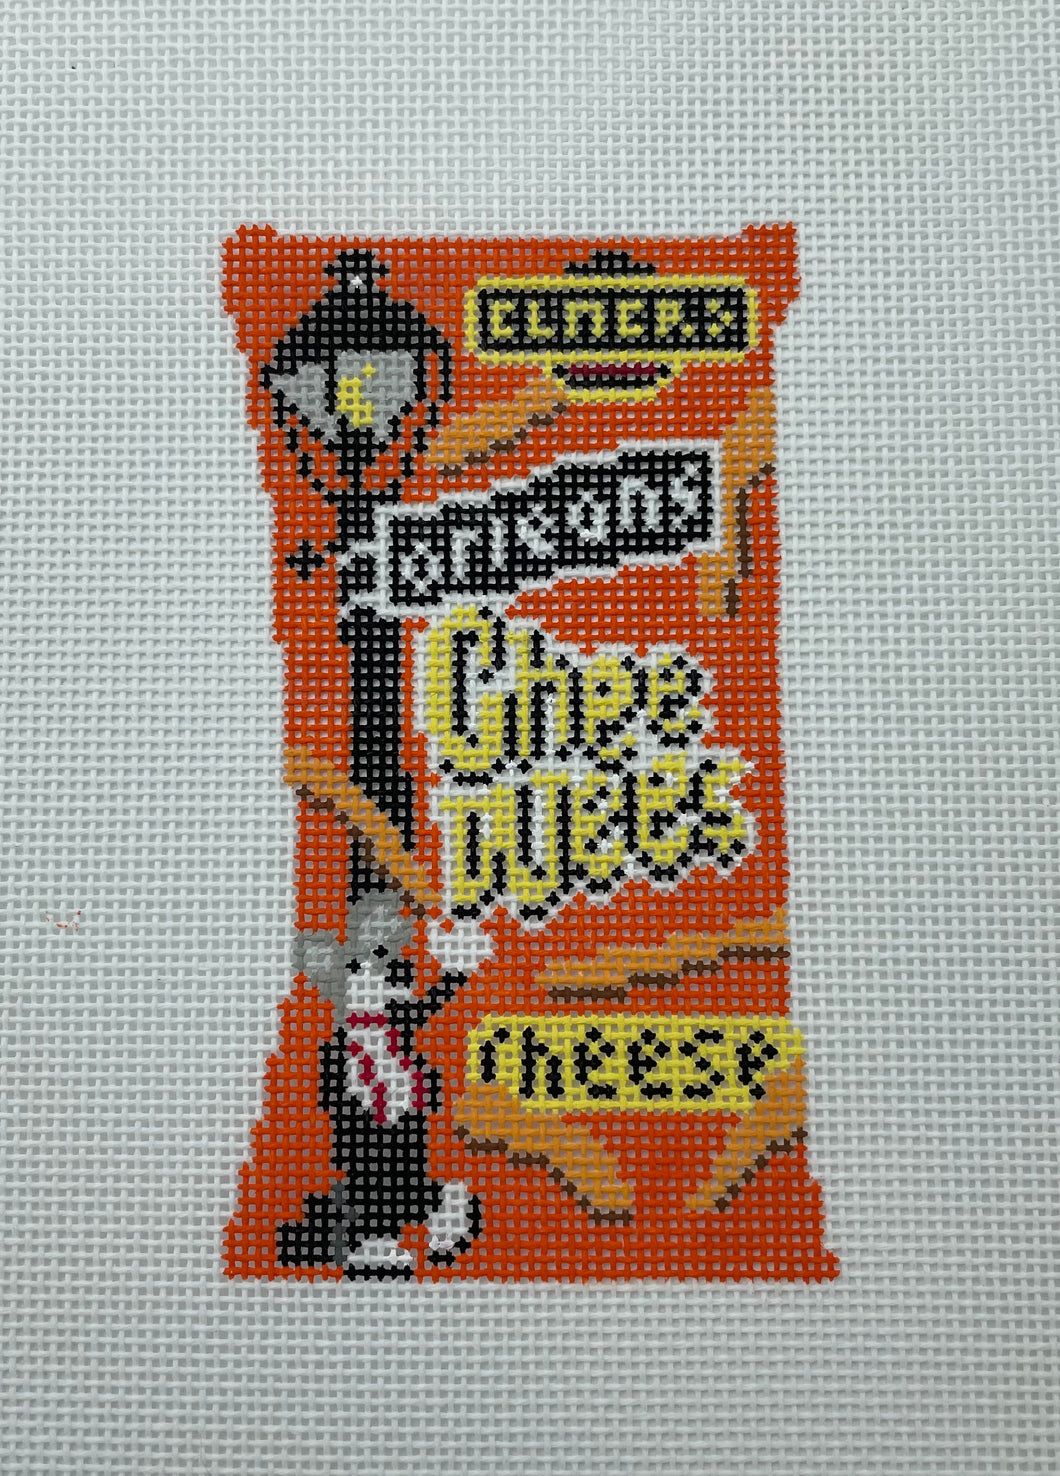 Elmer's Chee Wees Needlepoint Ornament